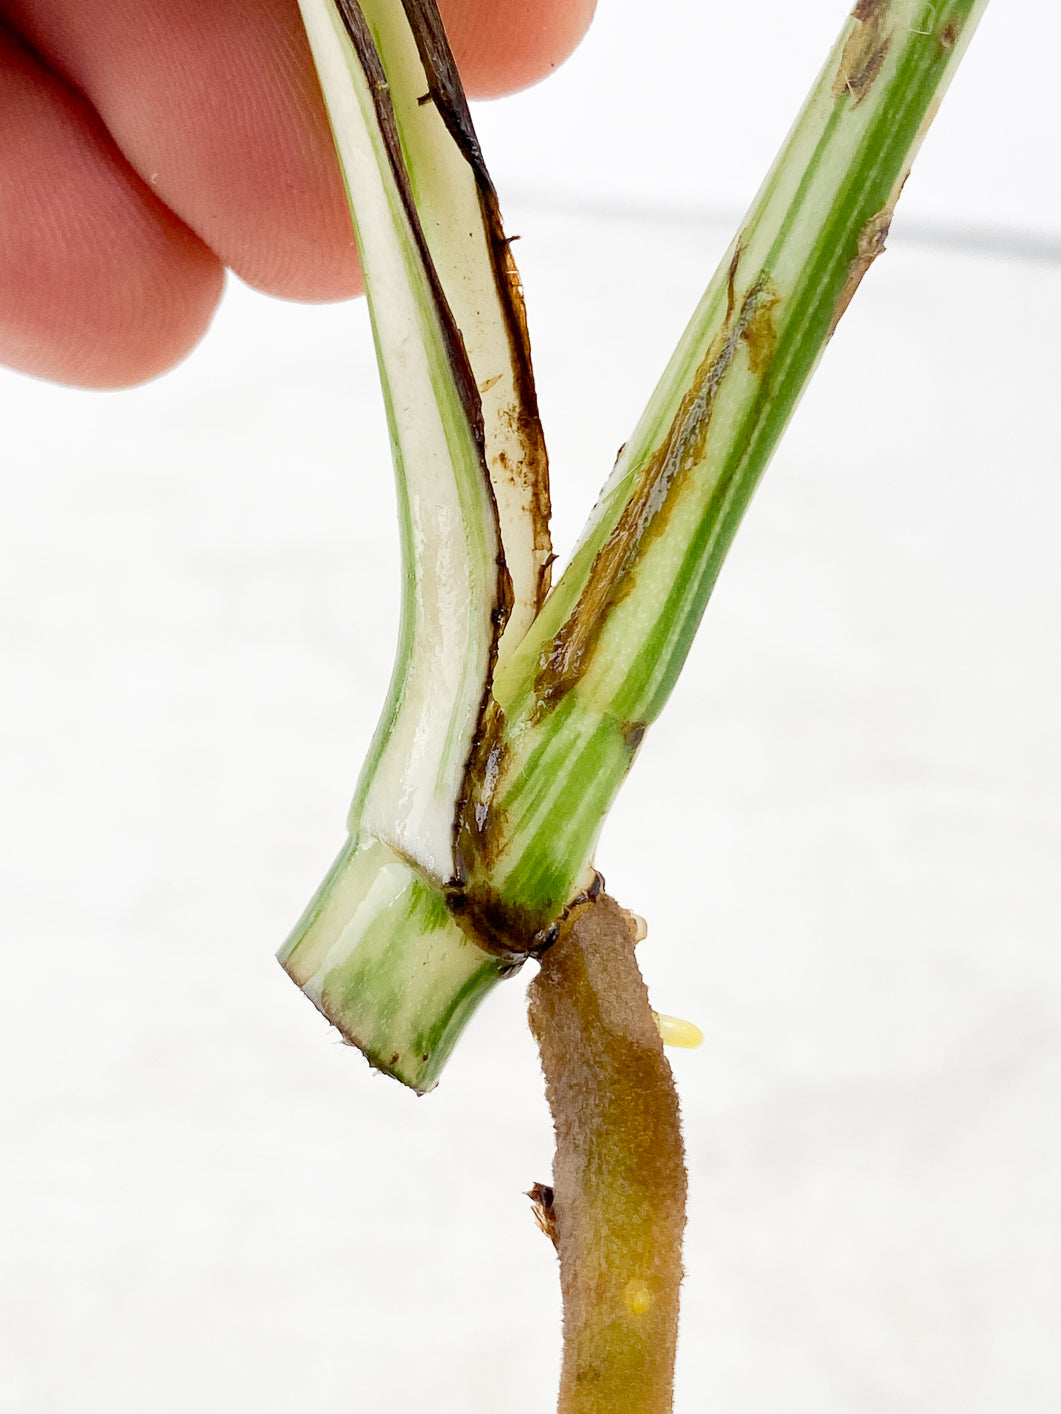 Monstera Albo White Tiger 2 leaves rooting top cutting